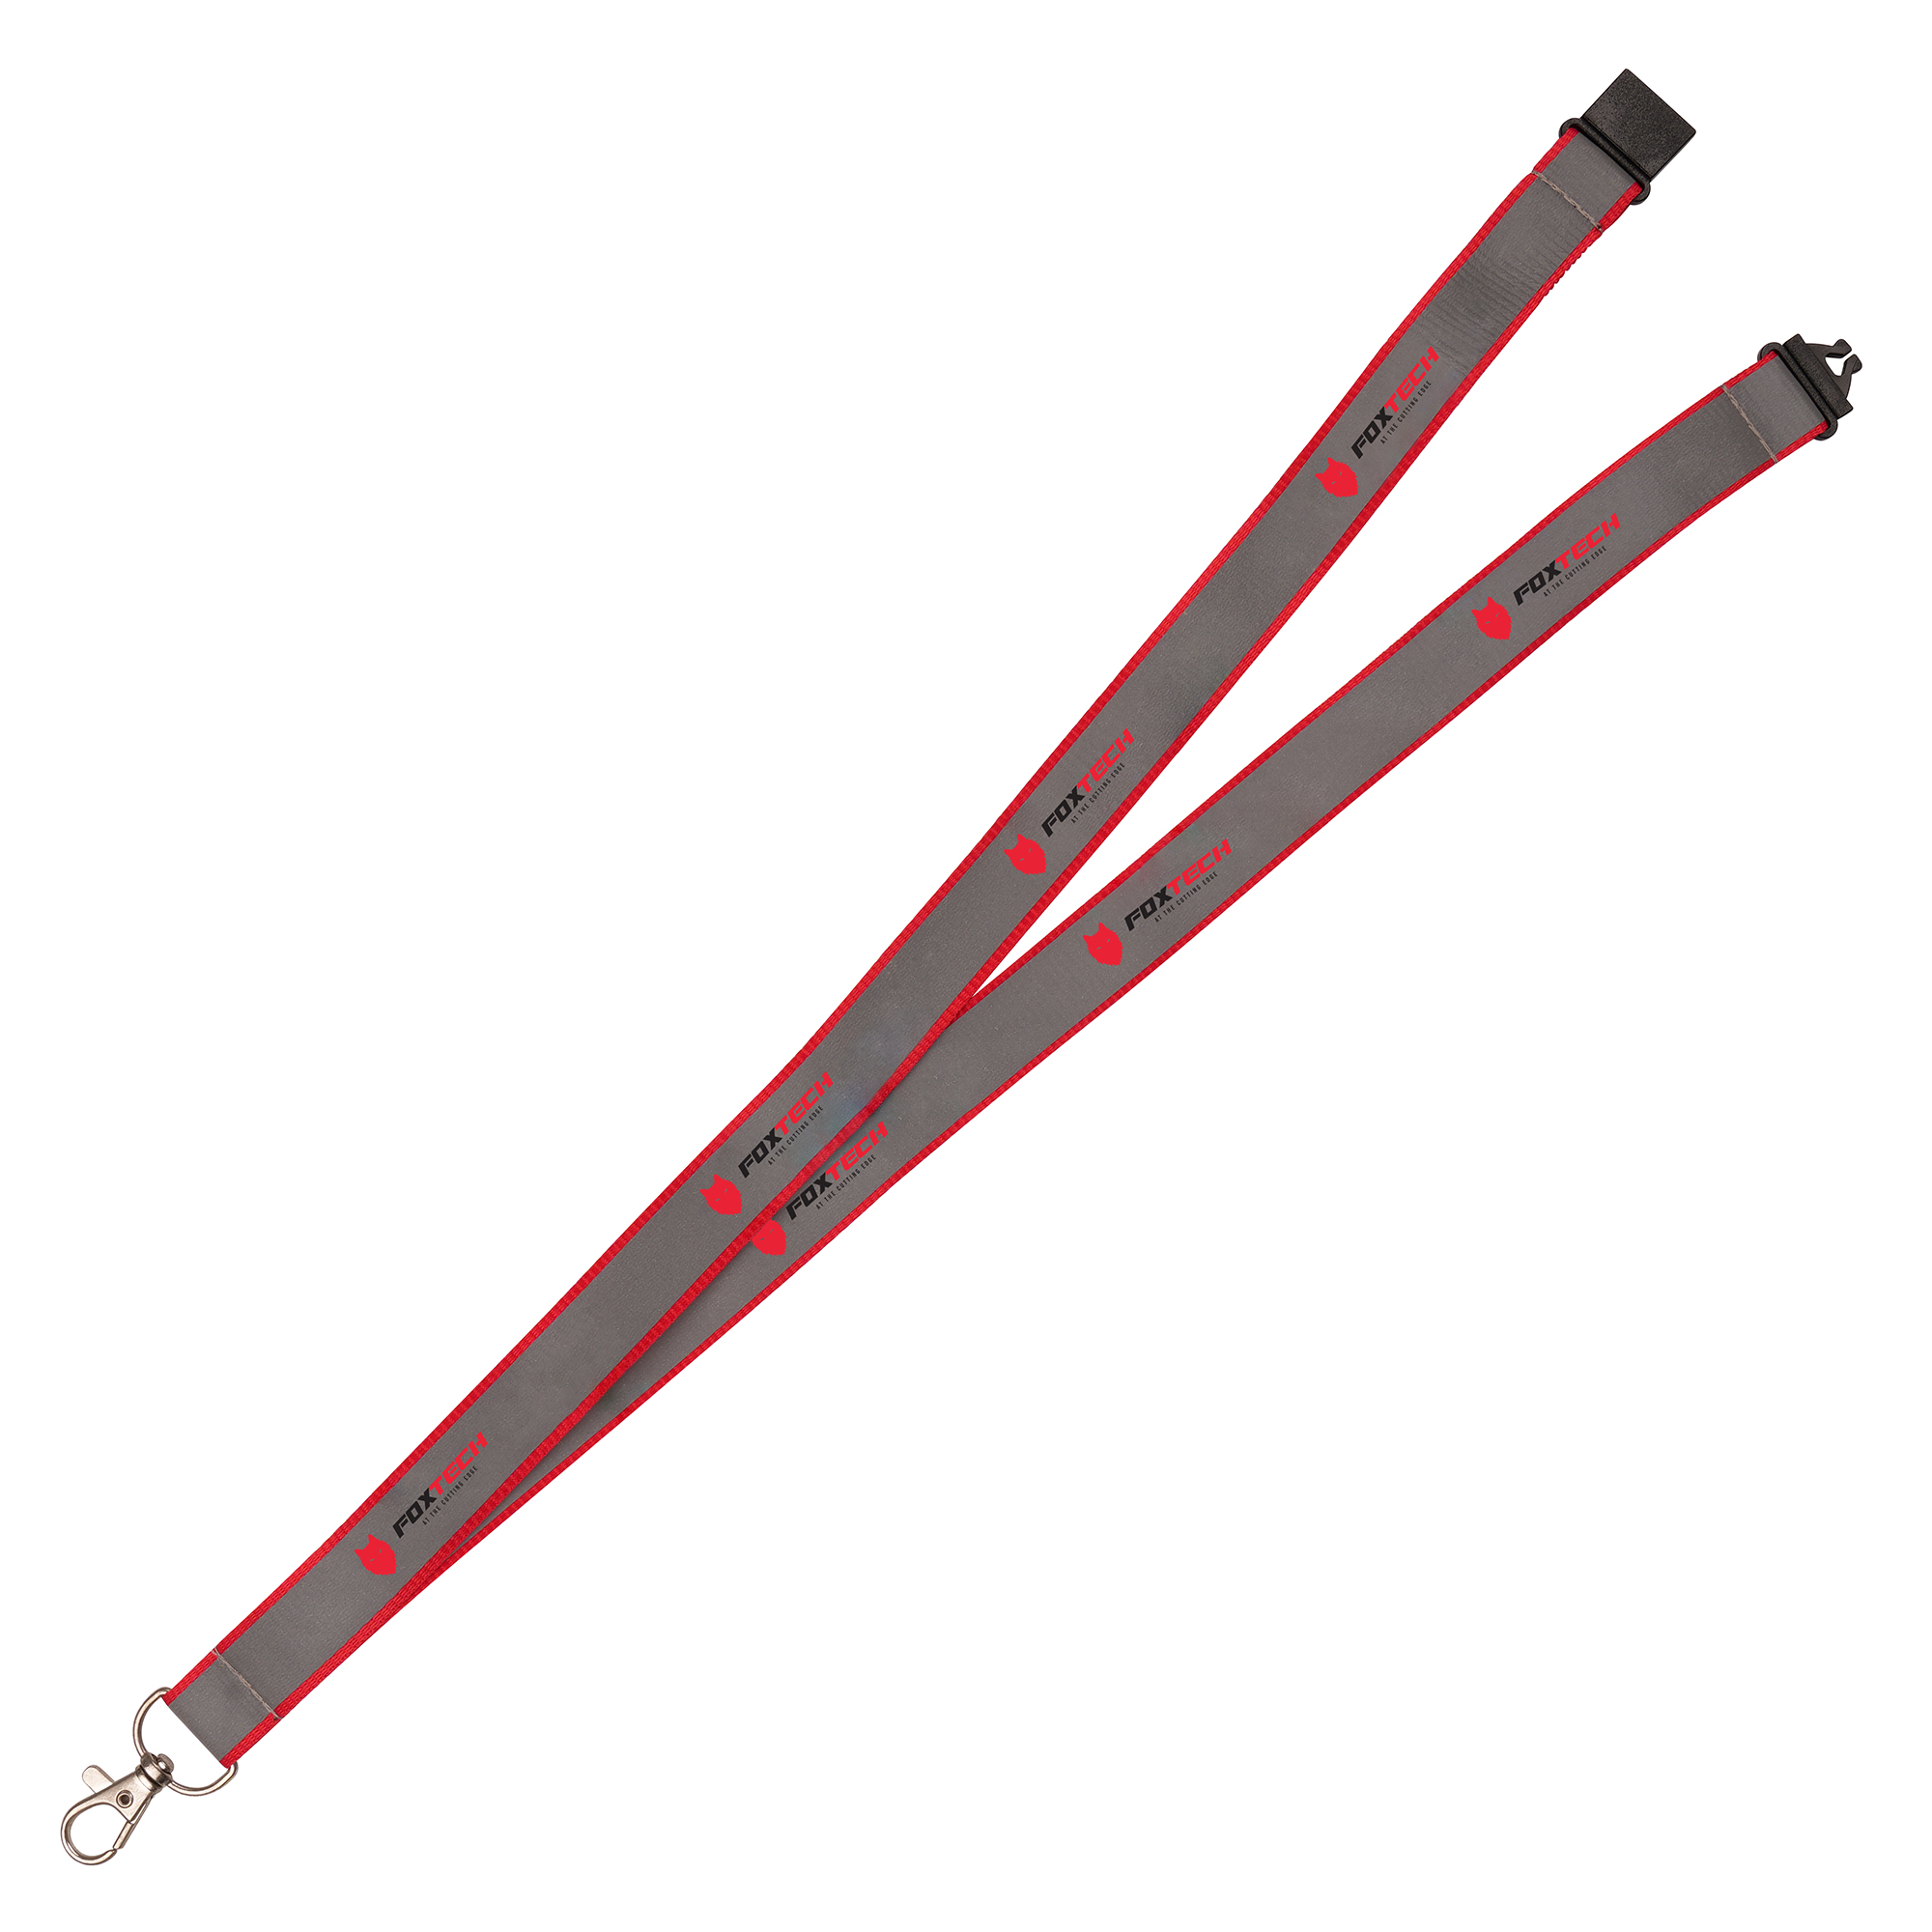 900 x 20mm flat polyester lanyard with grey reflective coating to one side. Includes metal trigger clip and plastic safety break.